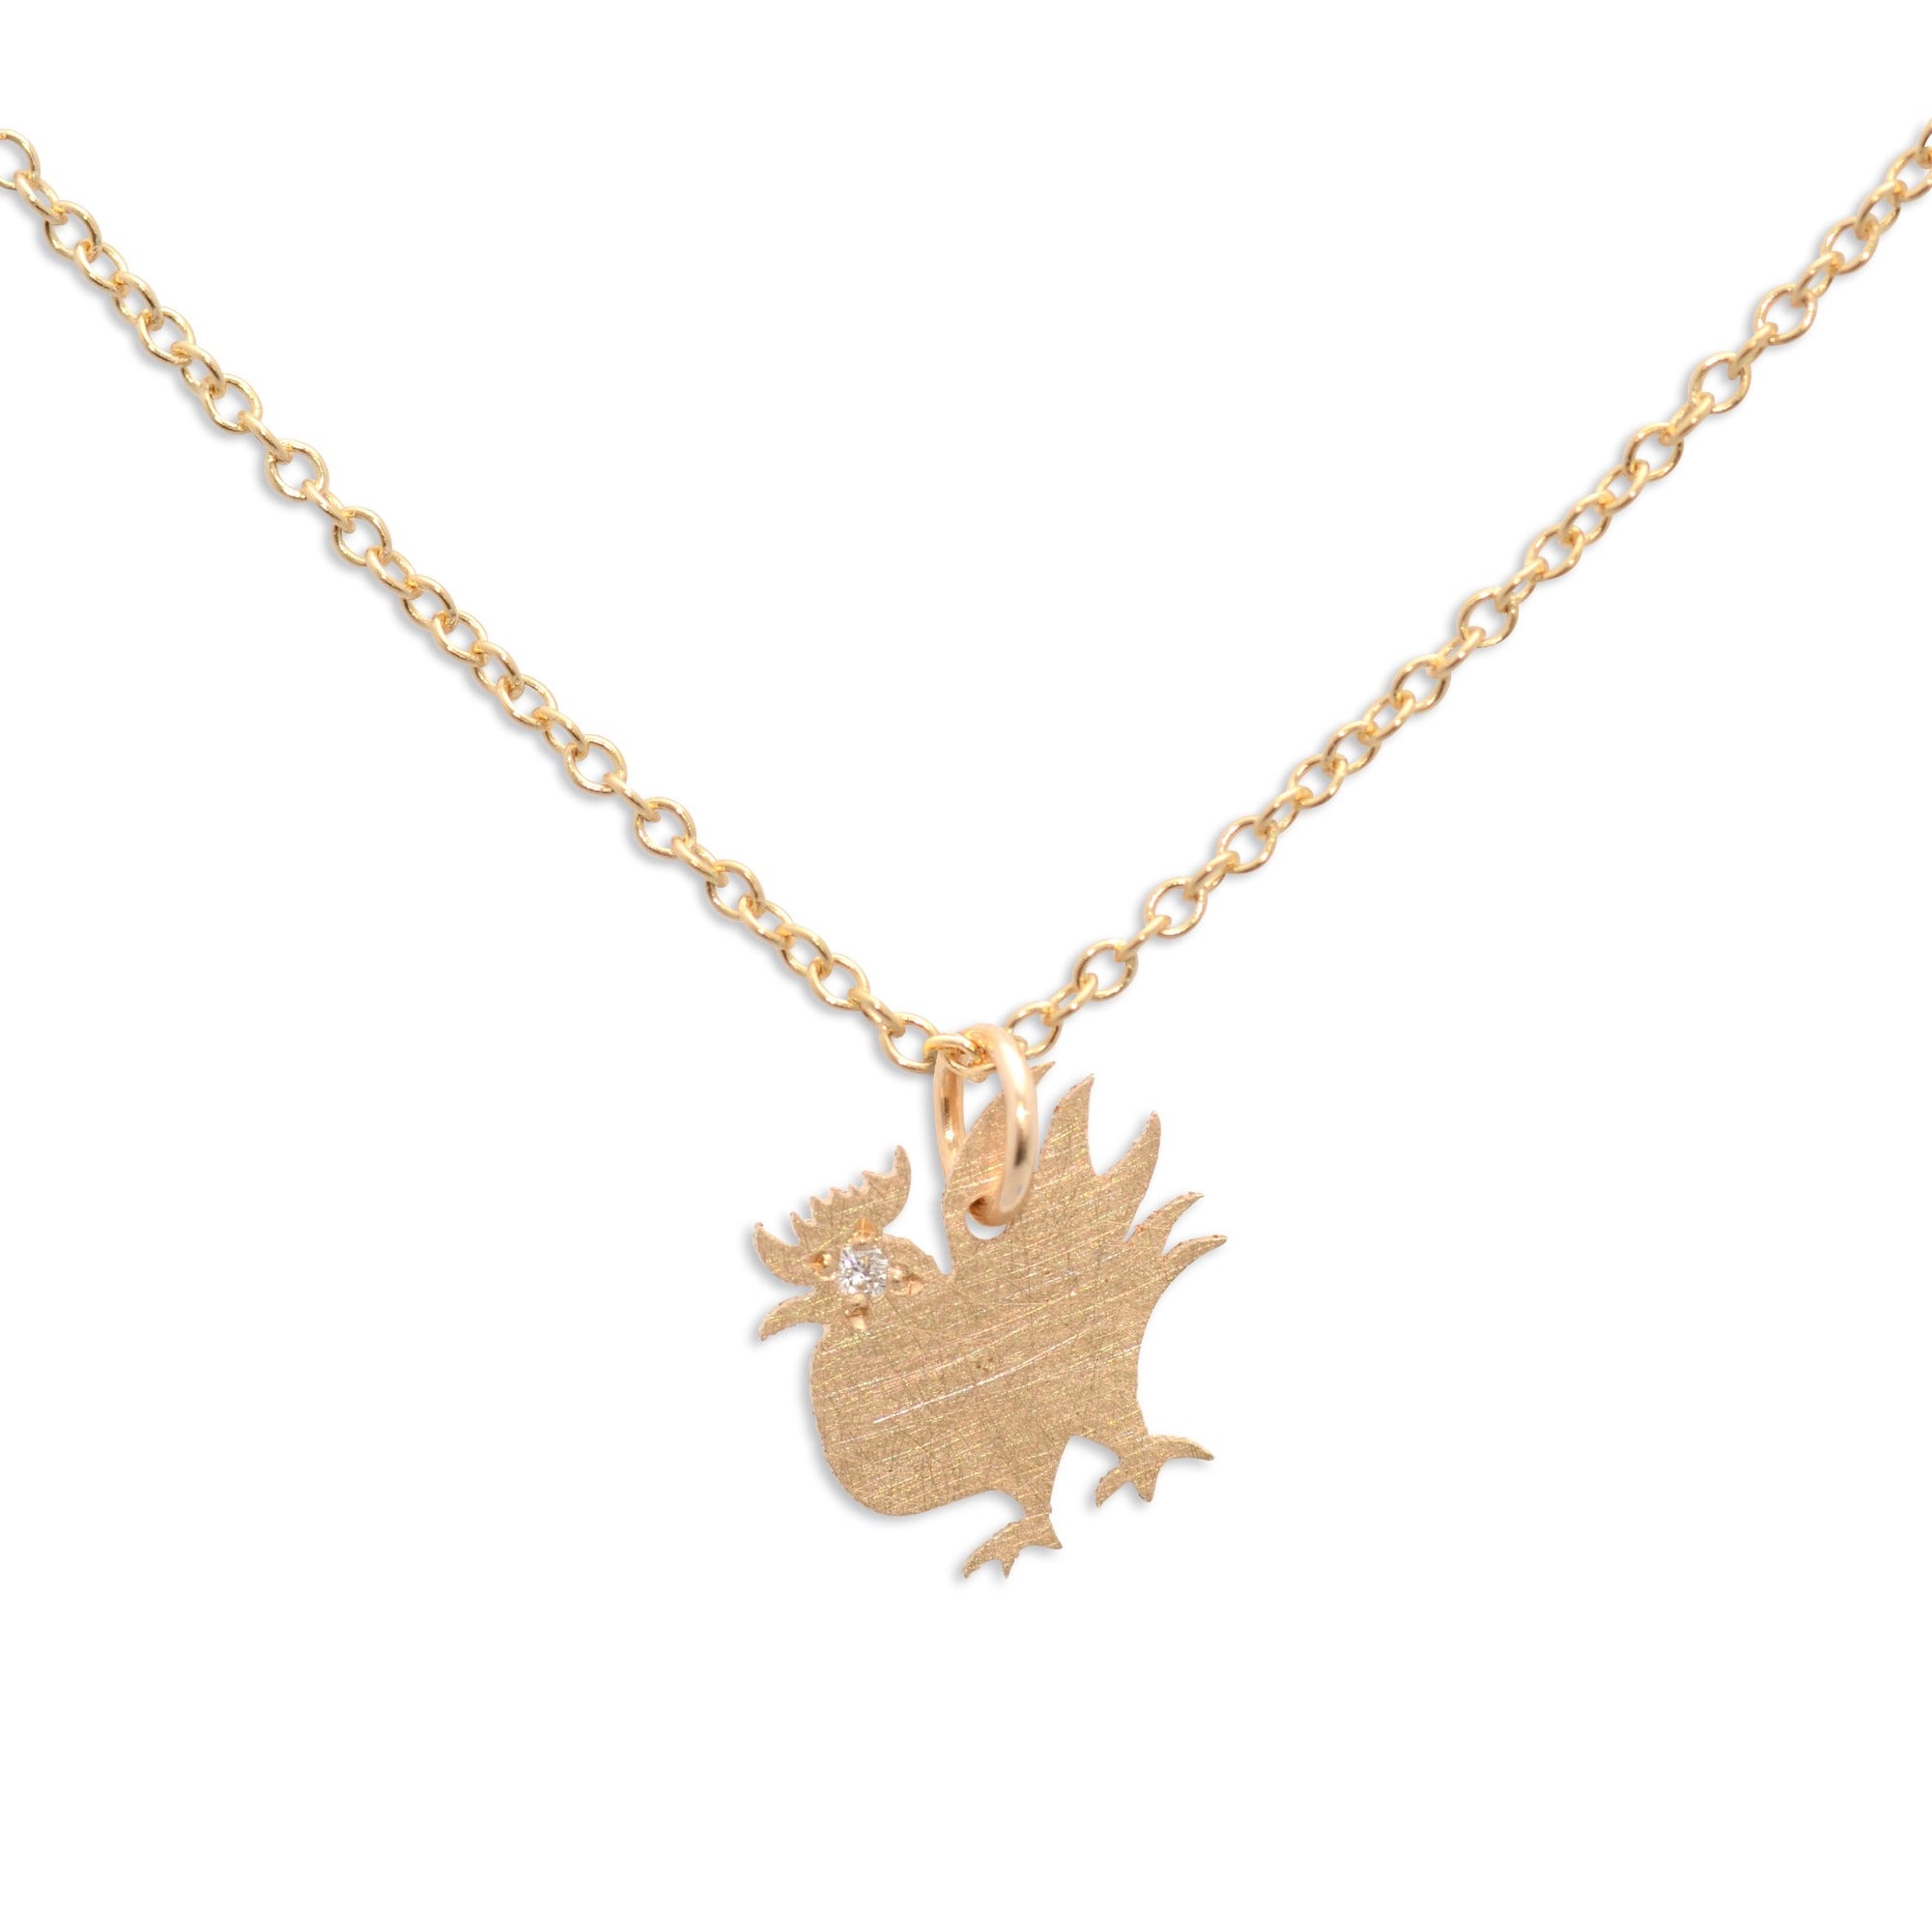 Chinese Zodiac Signs Rooster Pendant Bracelet